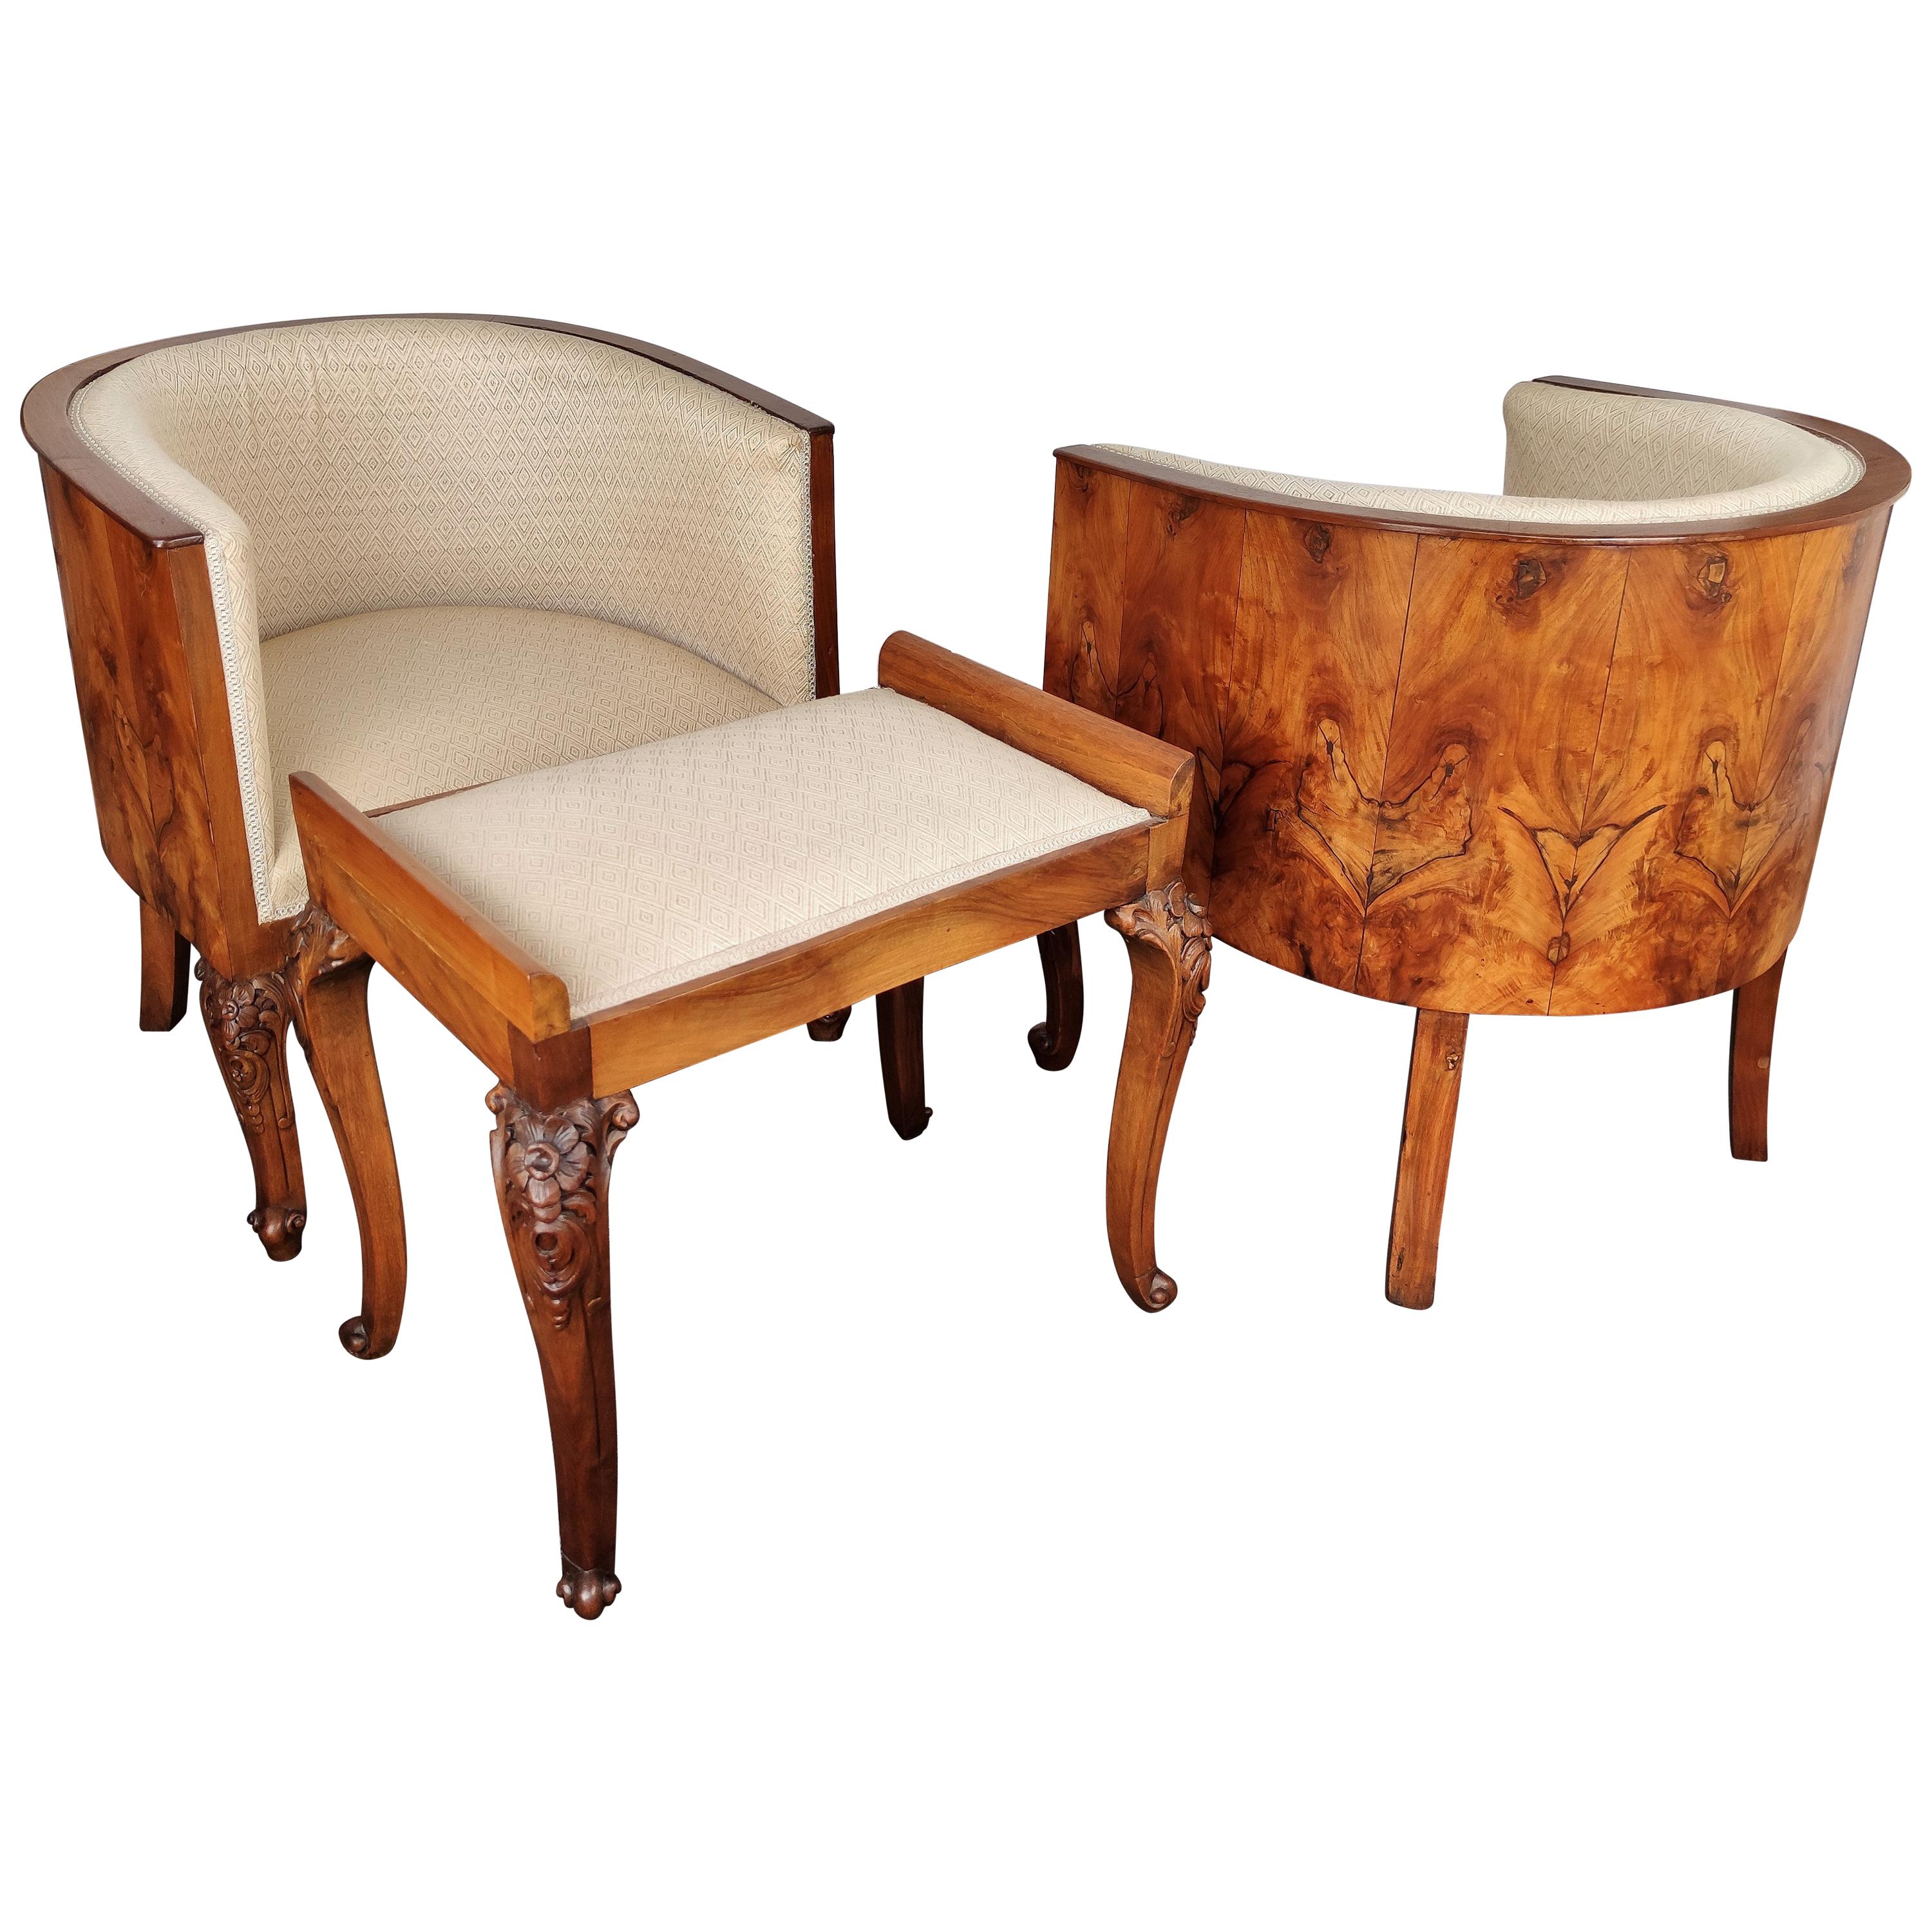 Italian Midcentury Art Deco Briar Walnut Wood Pair of Armchairs with Stools For Sale